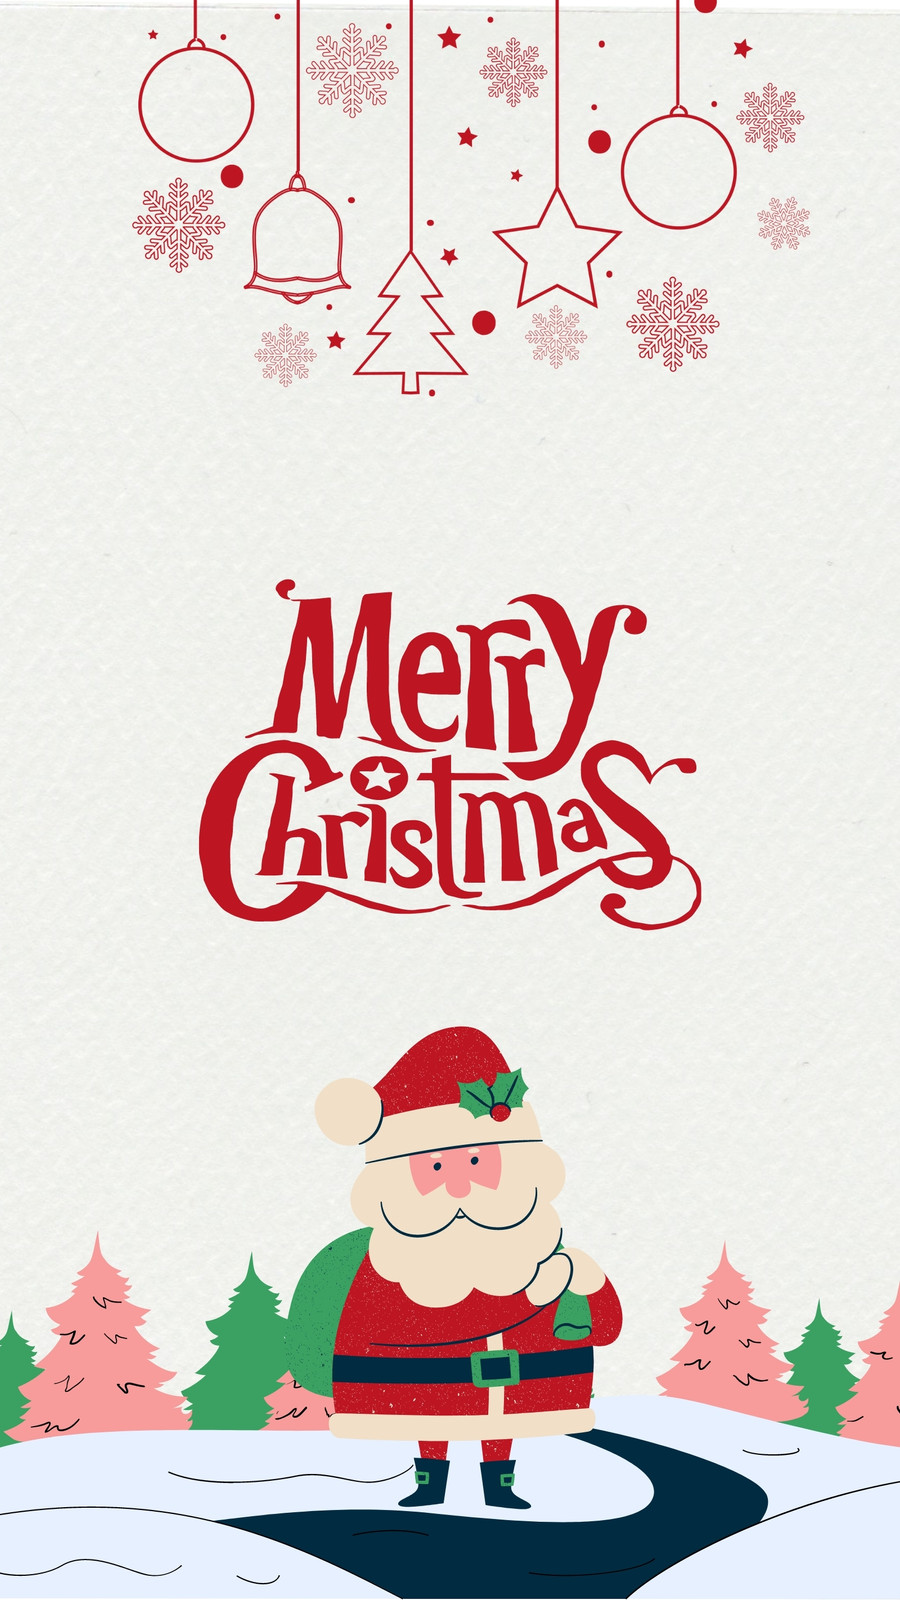 Santa's Christmas Photo Album - After Effects Templates